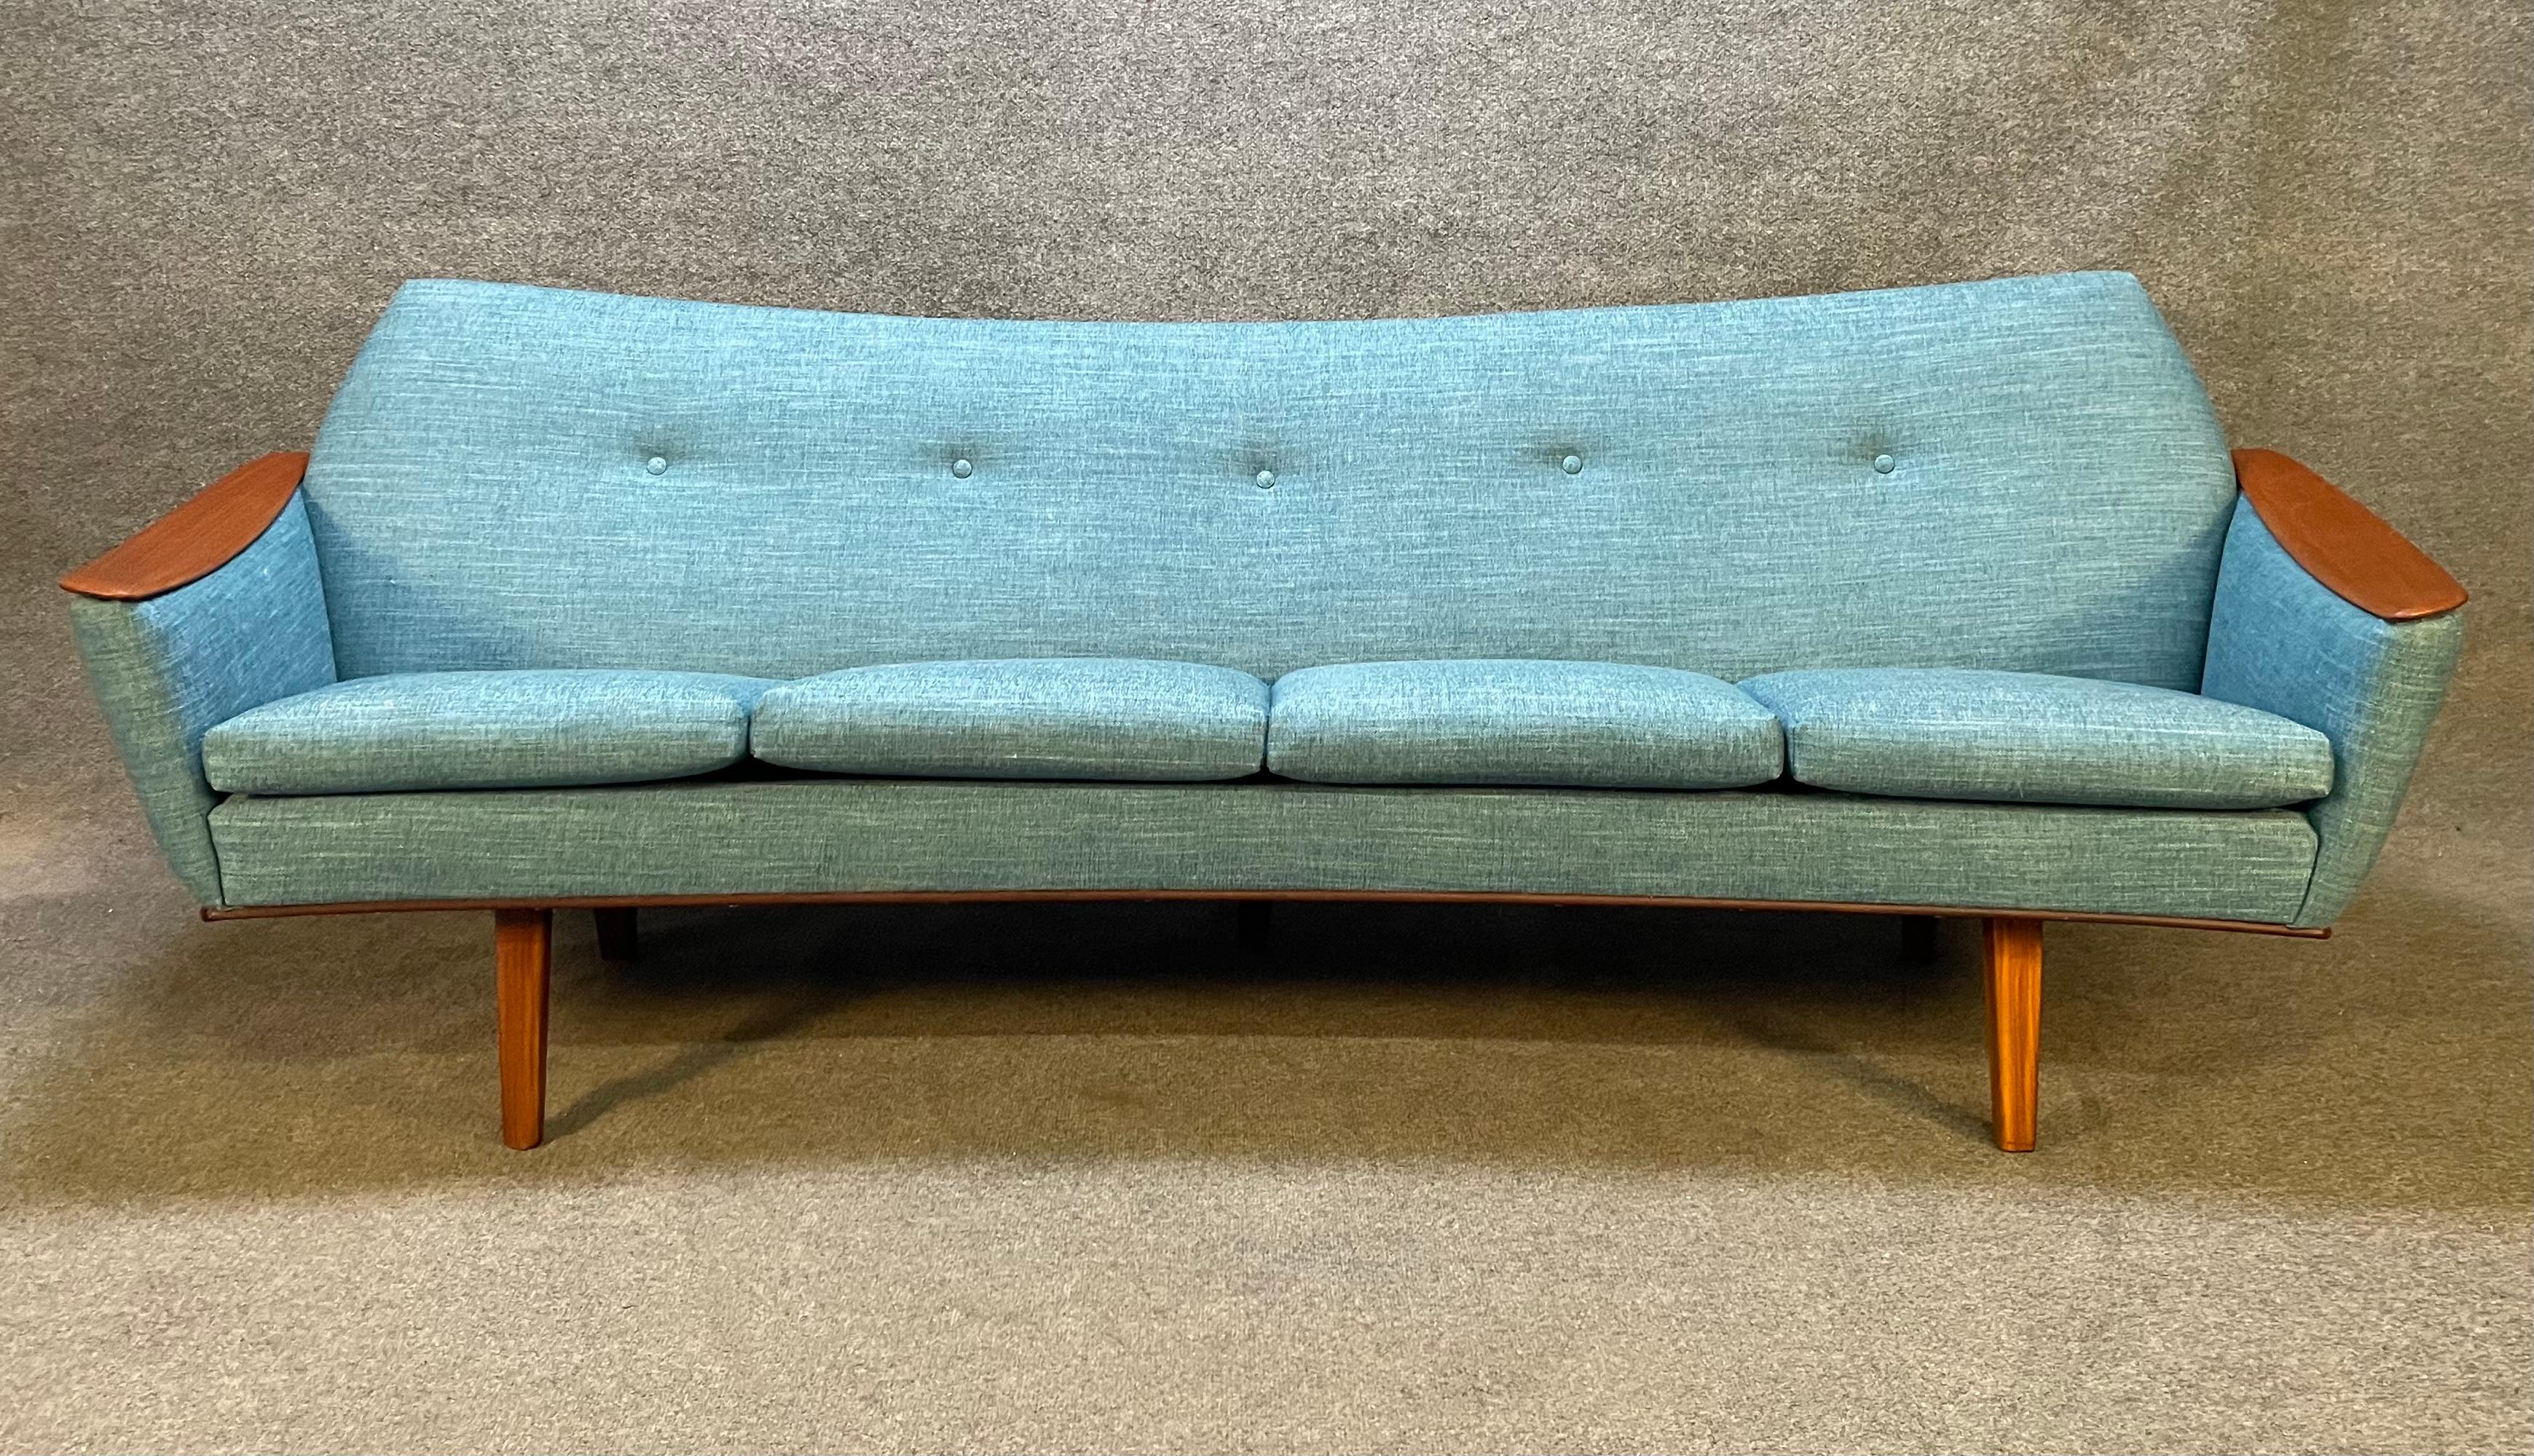 Here is a beautiful scandinavian modern sofa manufactured in Denmark in the 1960's.
This fully restored and comfortable couch, recently imported from Europe to California, features organic curves lines, teak paws and legs with brand new blue-teal